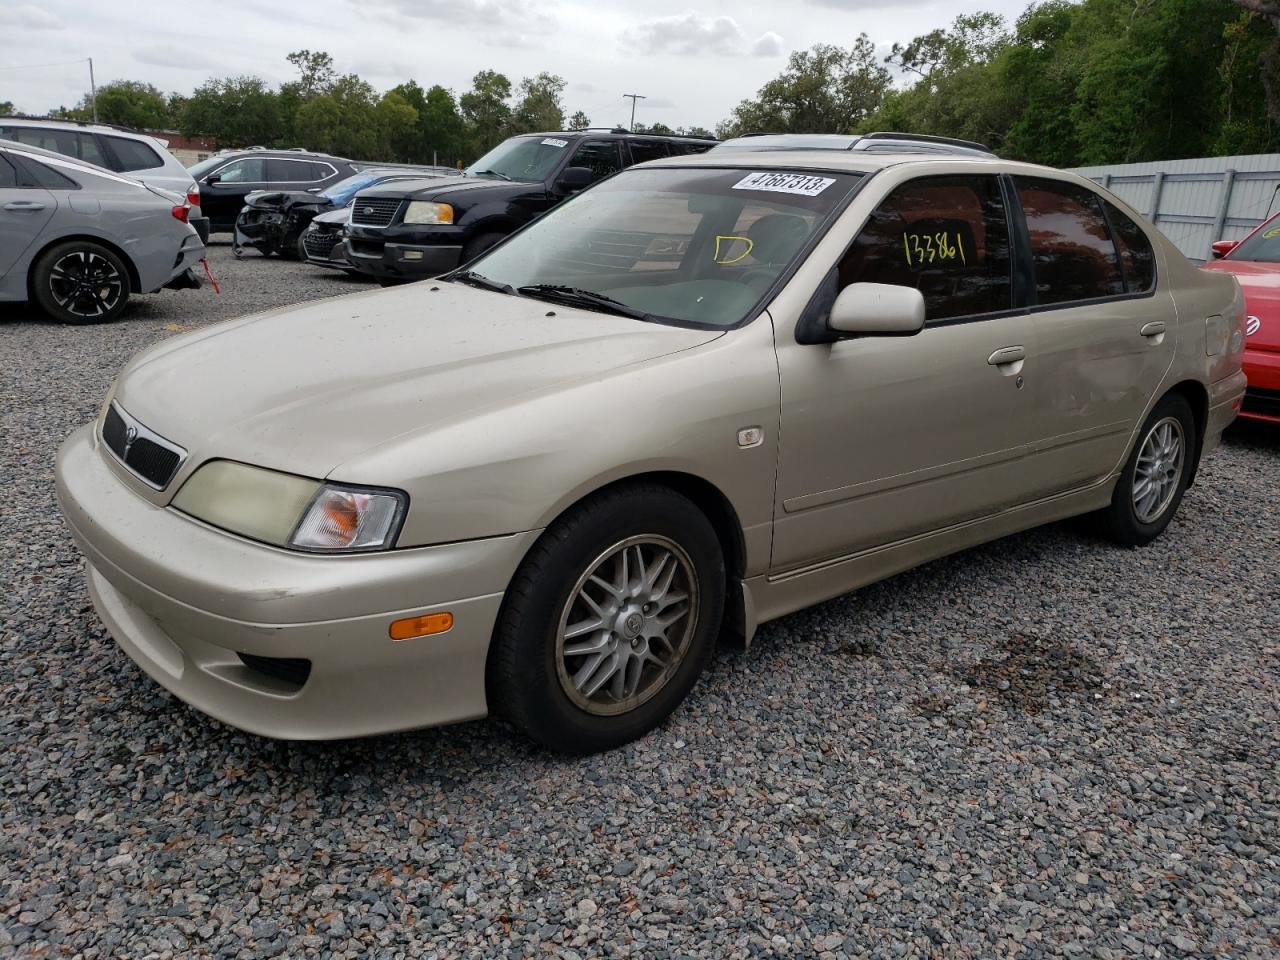 2001 Infiniti G20 for sale at Copart Riverview, FL Lot #47667*** |  SalvageReseller.com